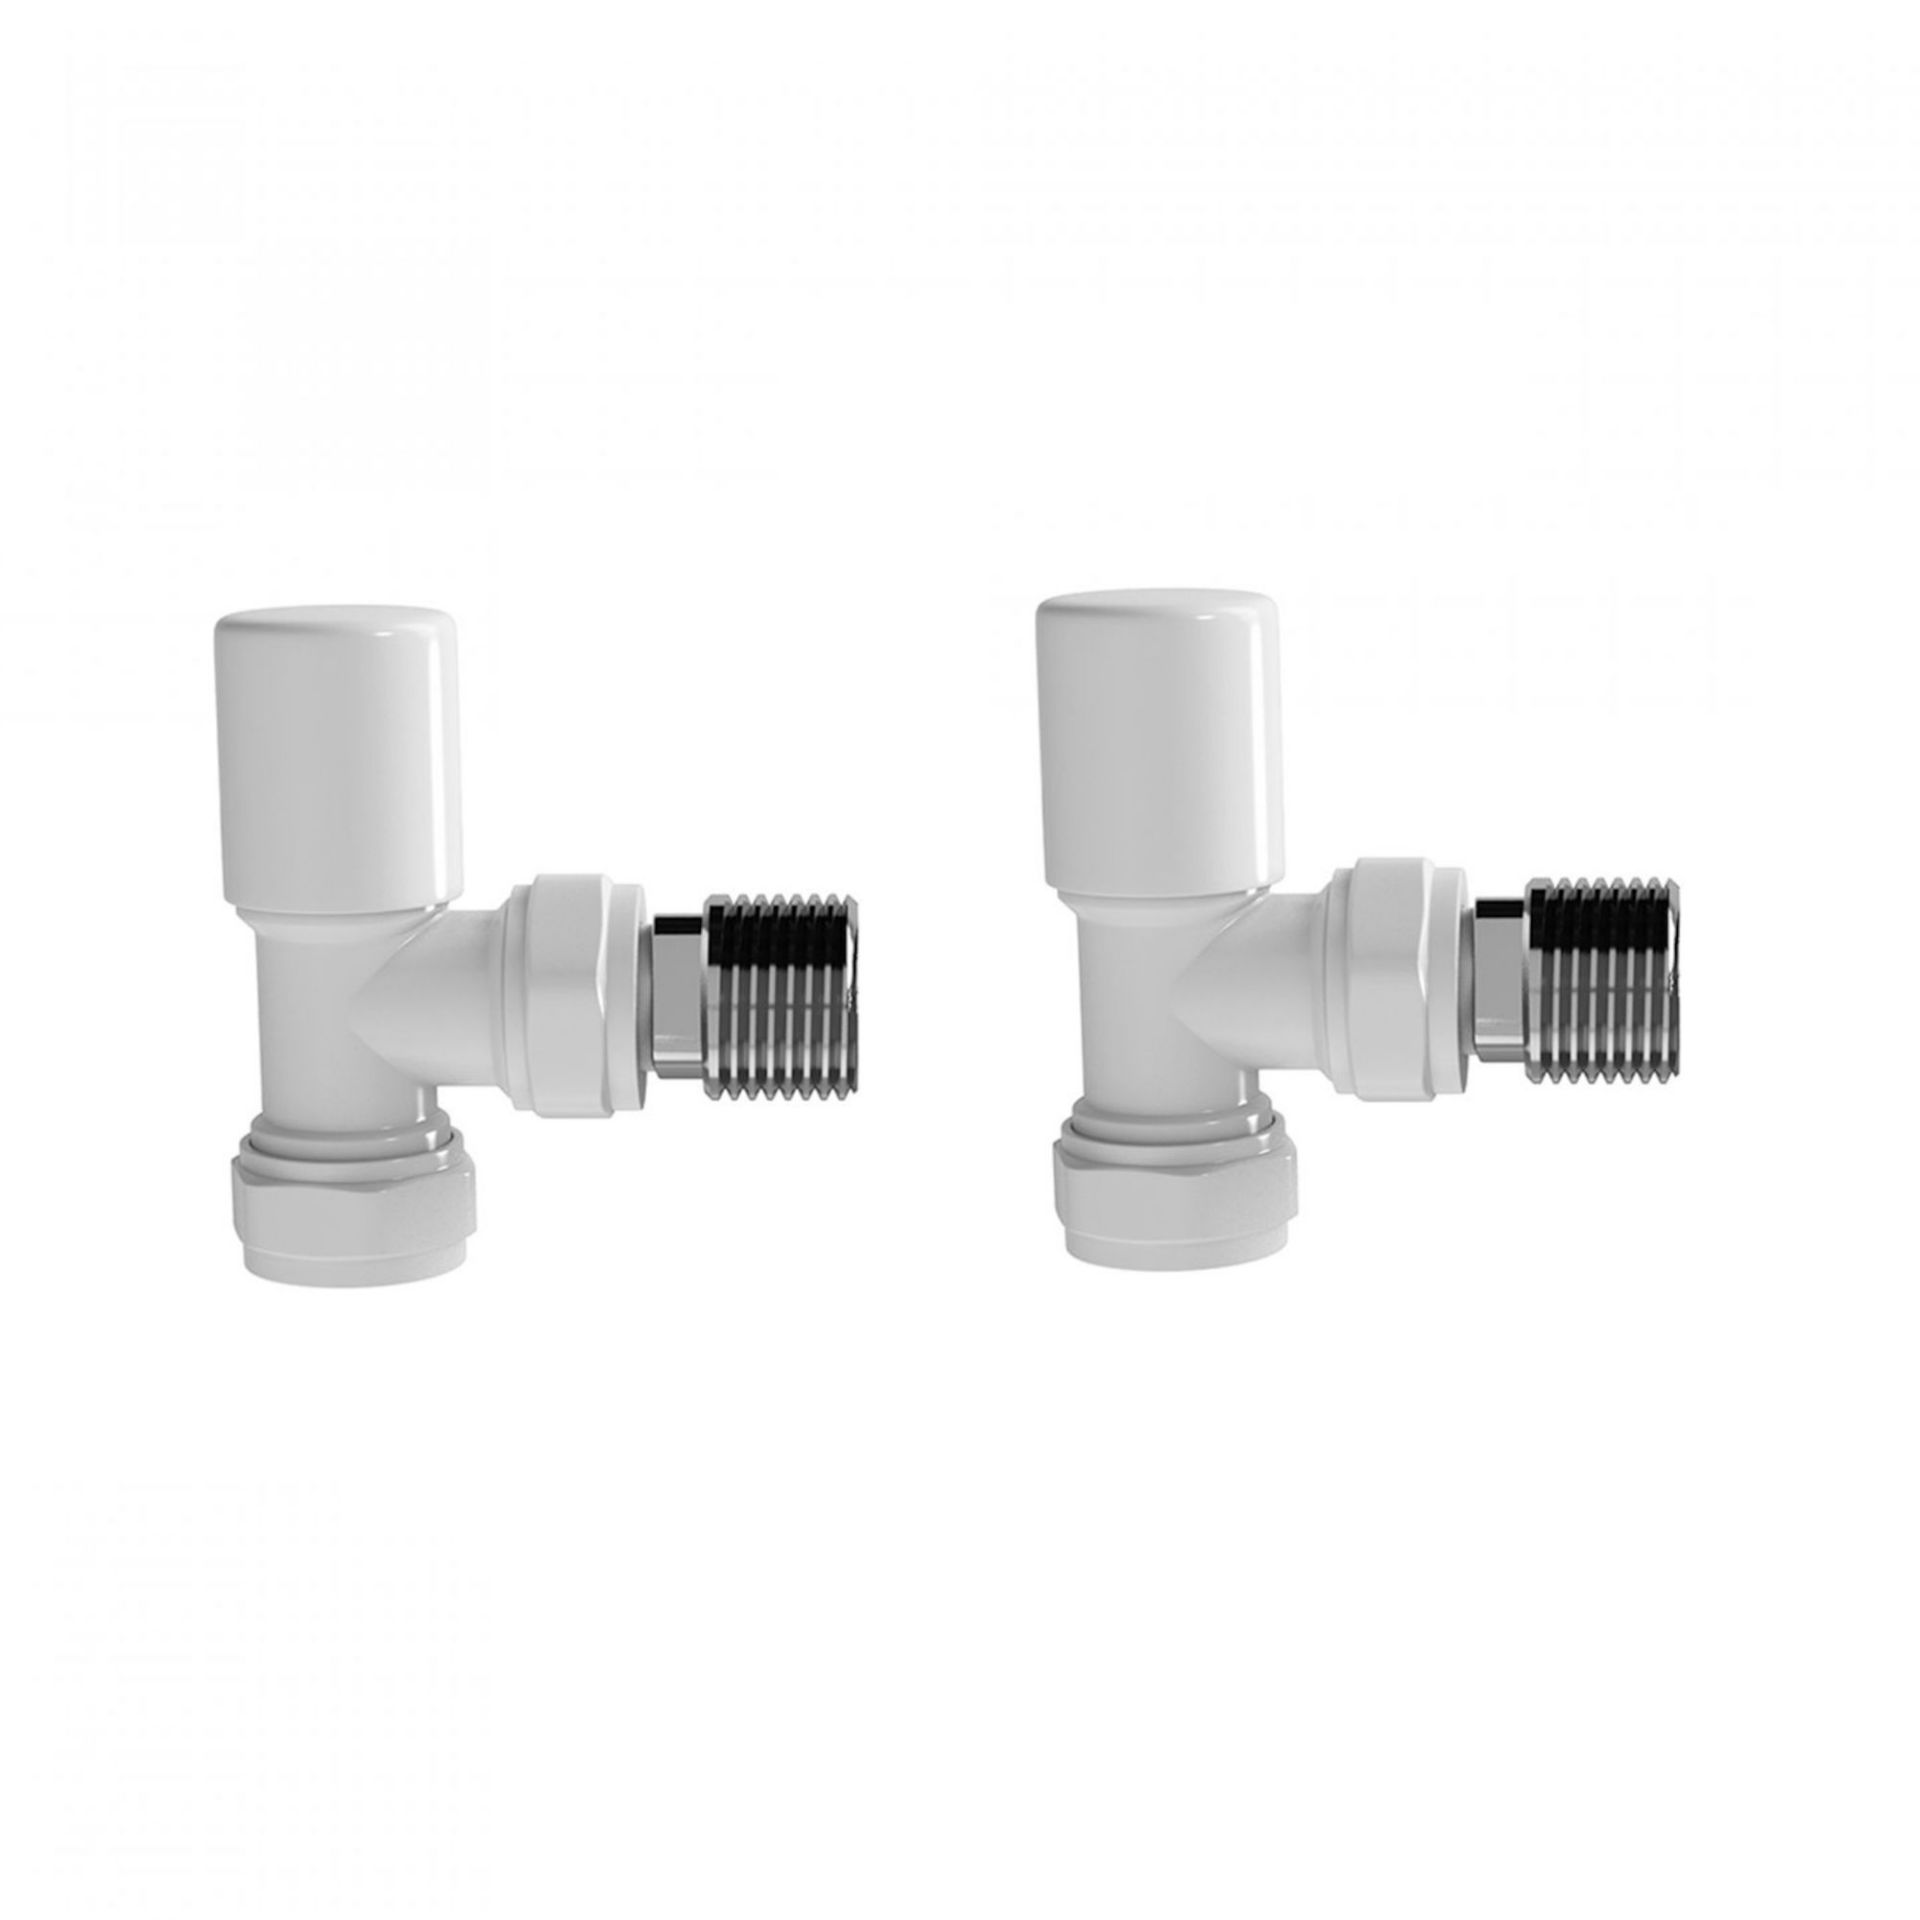 (RK1007) 15mm Standard Connection Angled Gloss White Radiator Valves Solid brass construct An... - Image 2 of 3